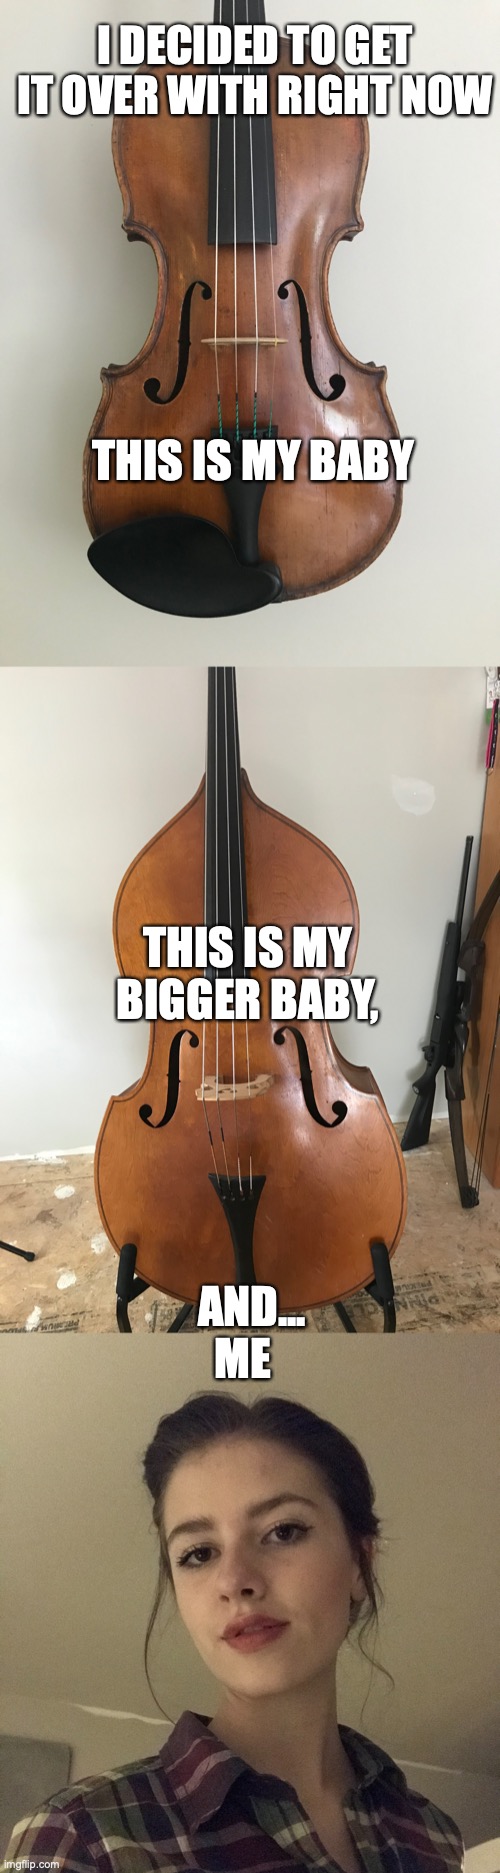 I DECIDED TO GET IT OVER WITH RIGHT NOW; THIS IS MY BABY; THIS IS MY BIGGER BABY, AND...
ME | made w/ Imgflip meme maker